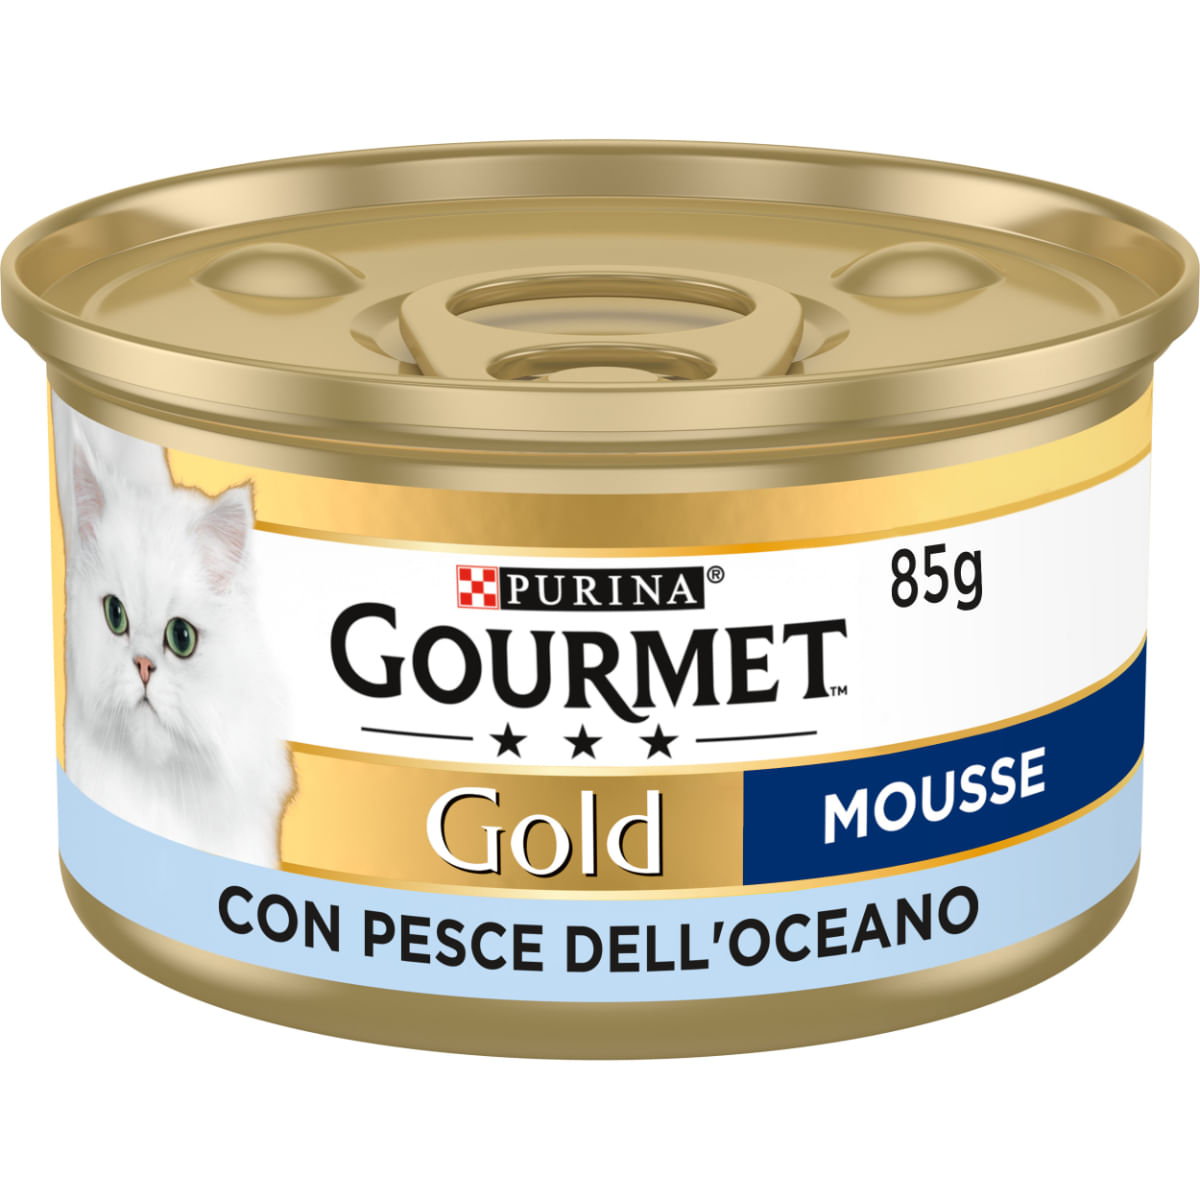 Gourmet Gold 85gr Mousse con Pesce dell'Oceano